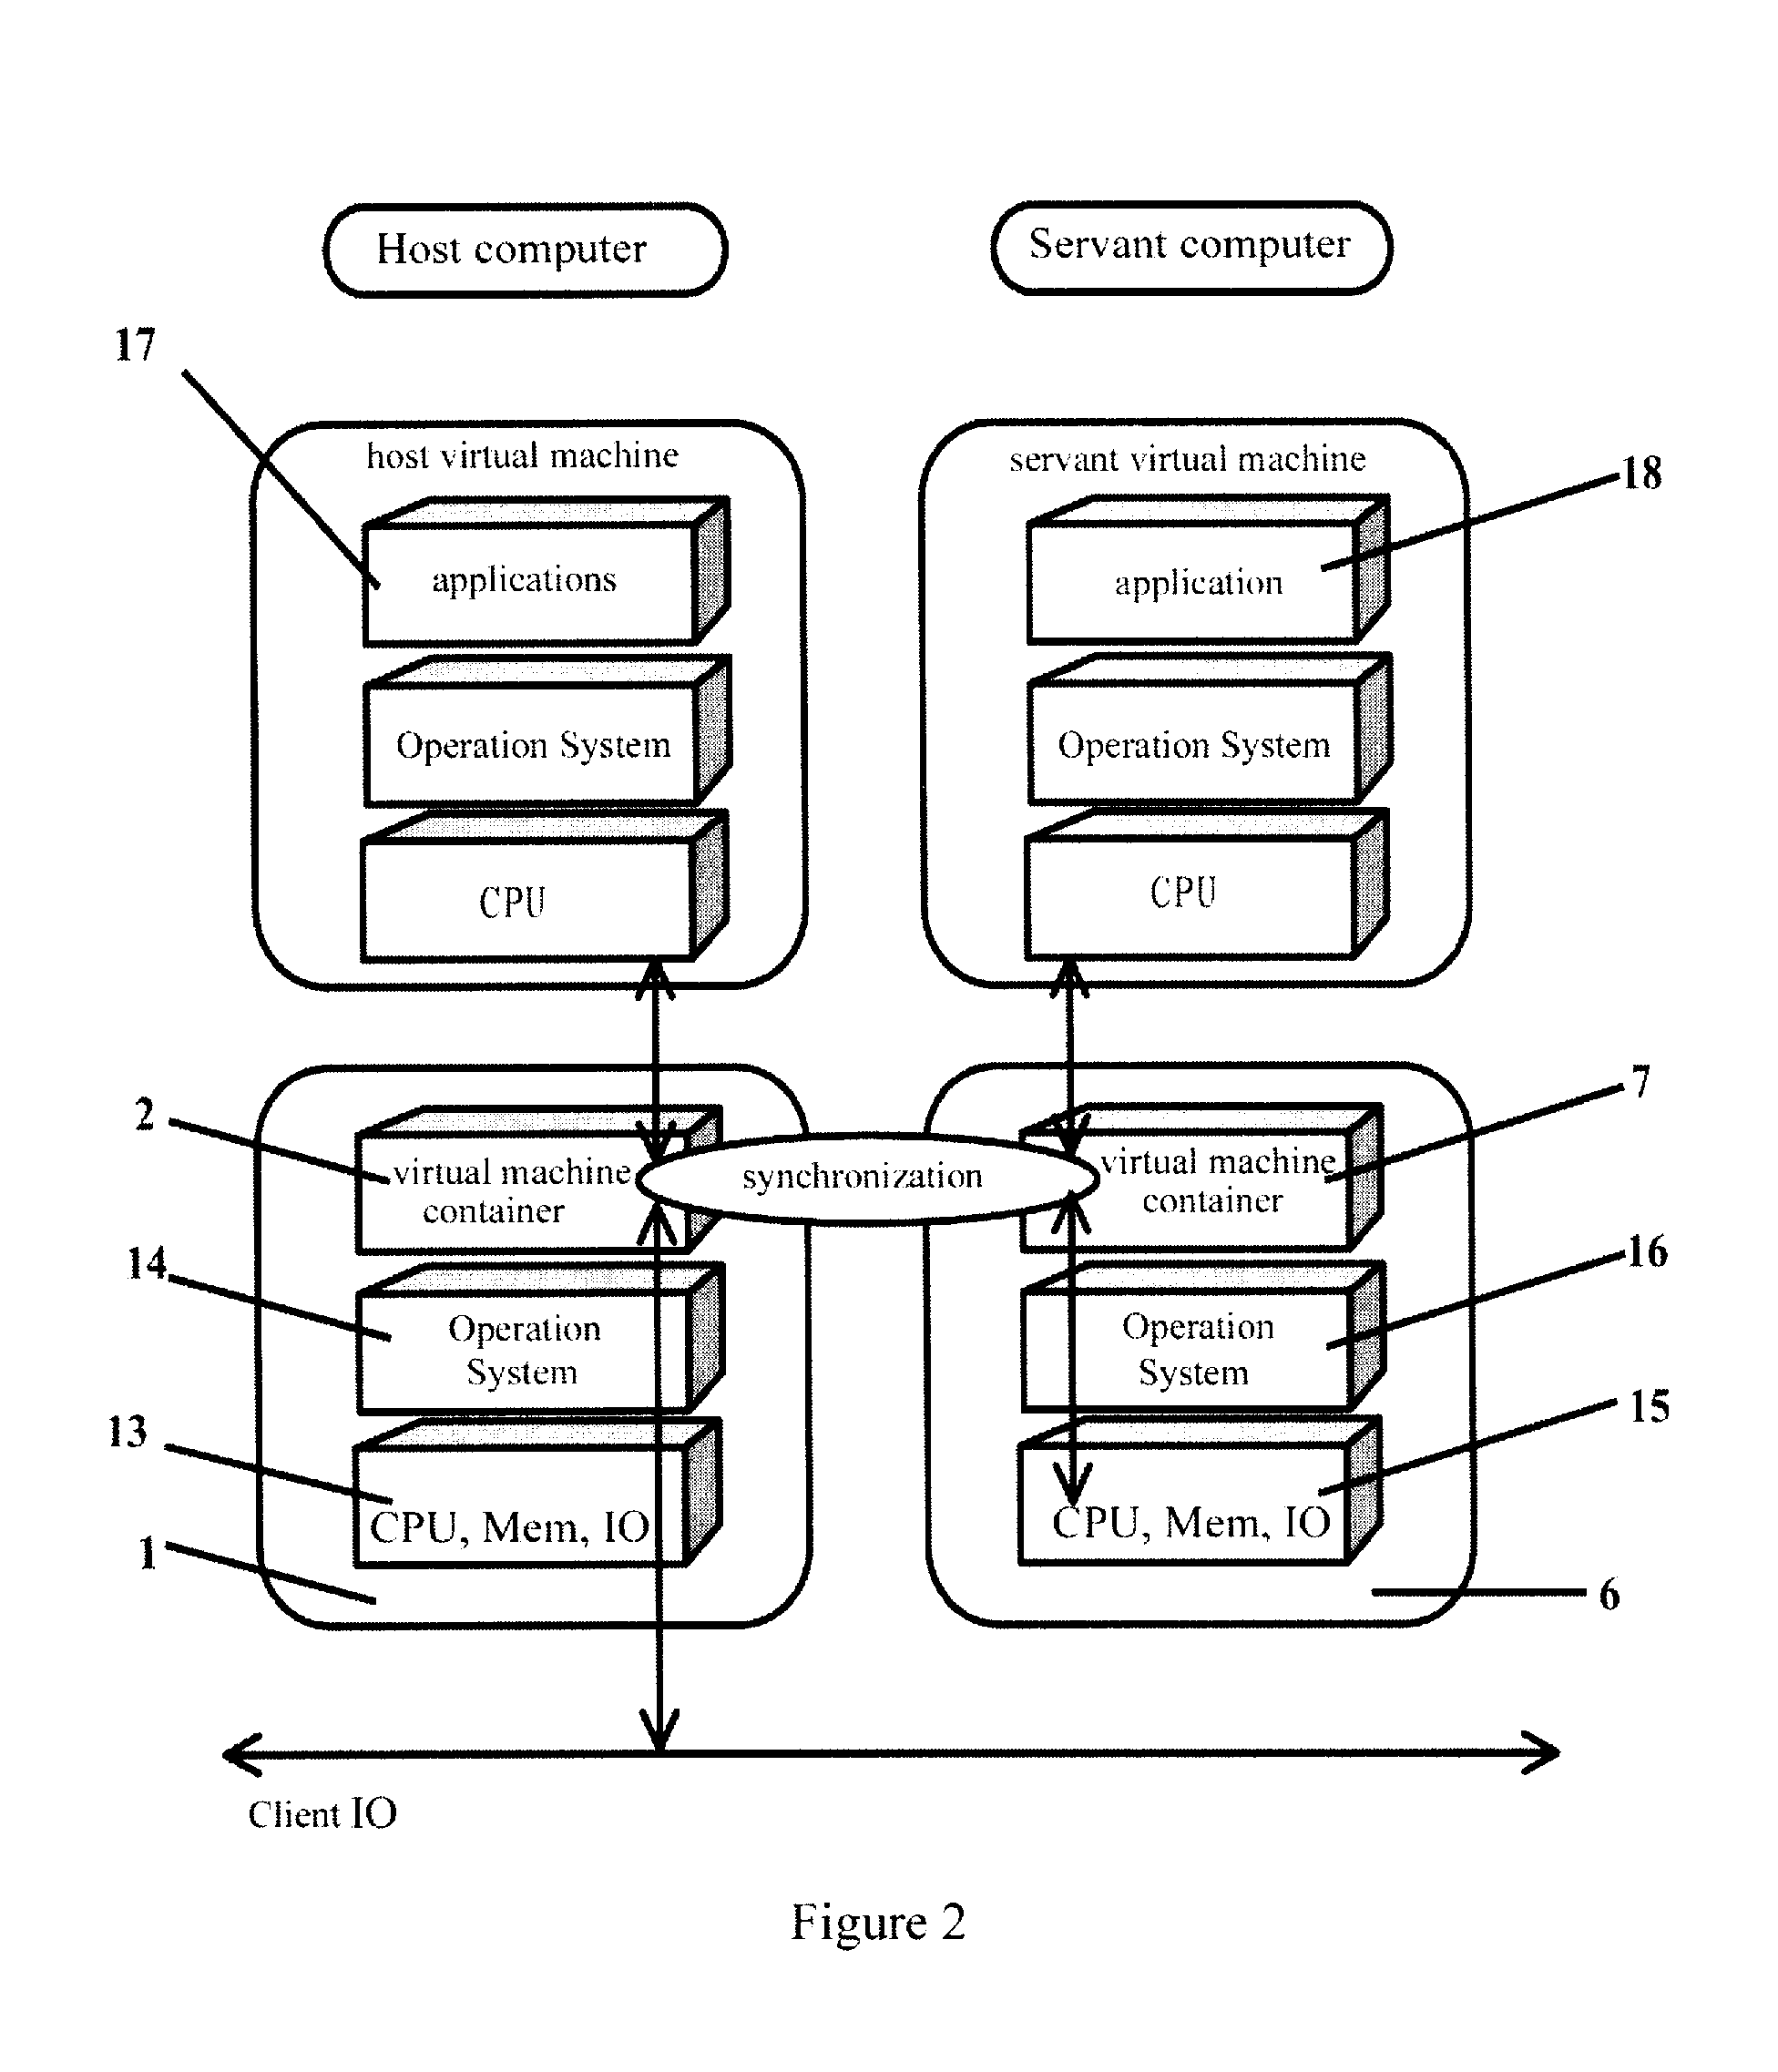 Method and computer system for making a computer have high availability